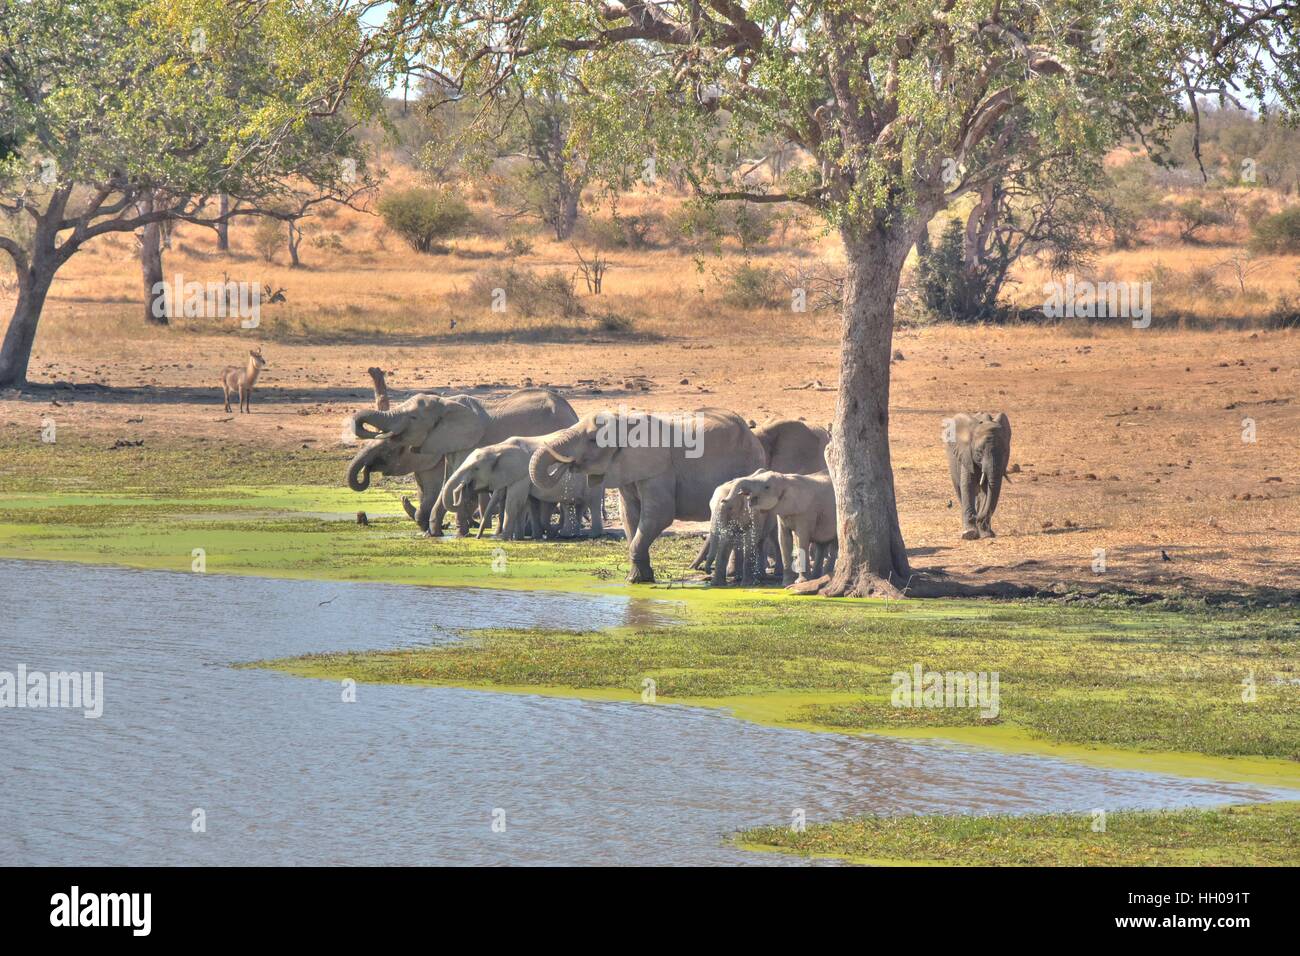 A waterbuck looking on at a herd of elephants drinking water peacefully in the Kruger National Park, Mpumalanga, South Africa. Stock Photo